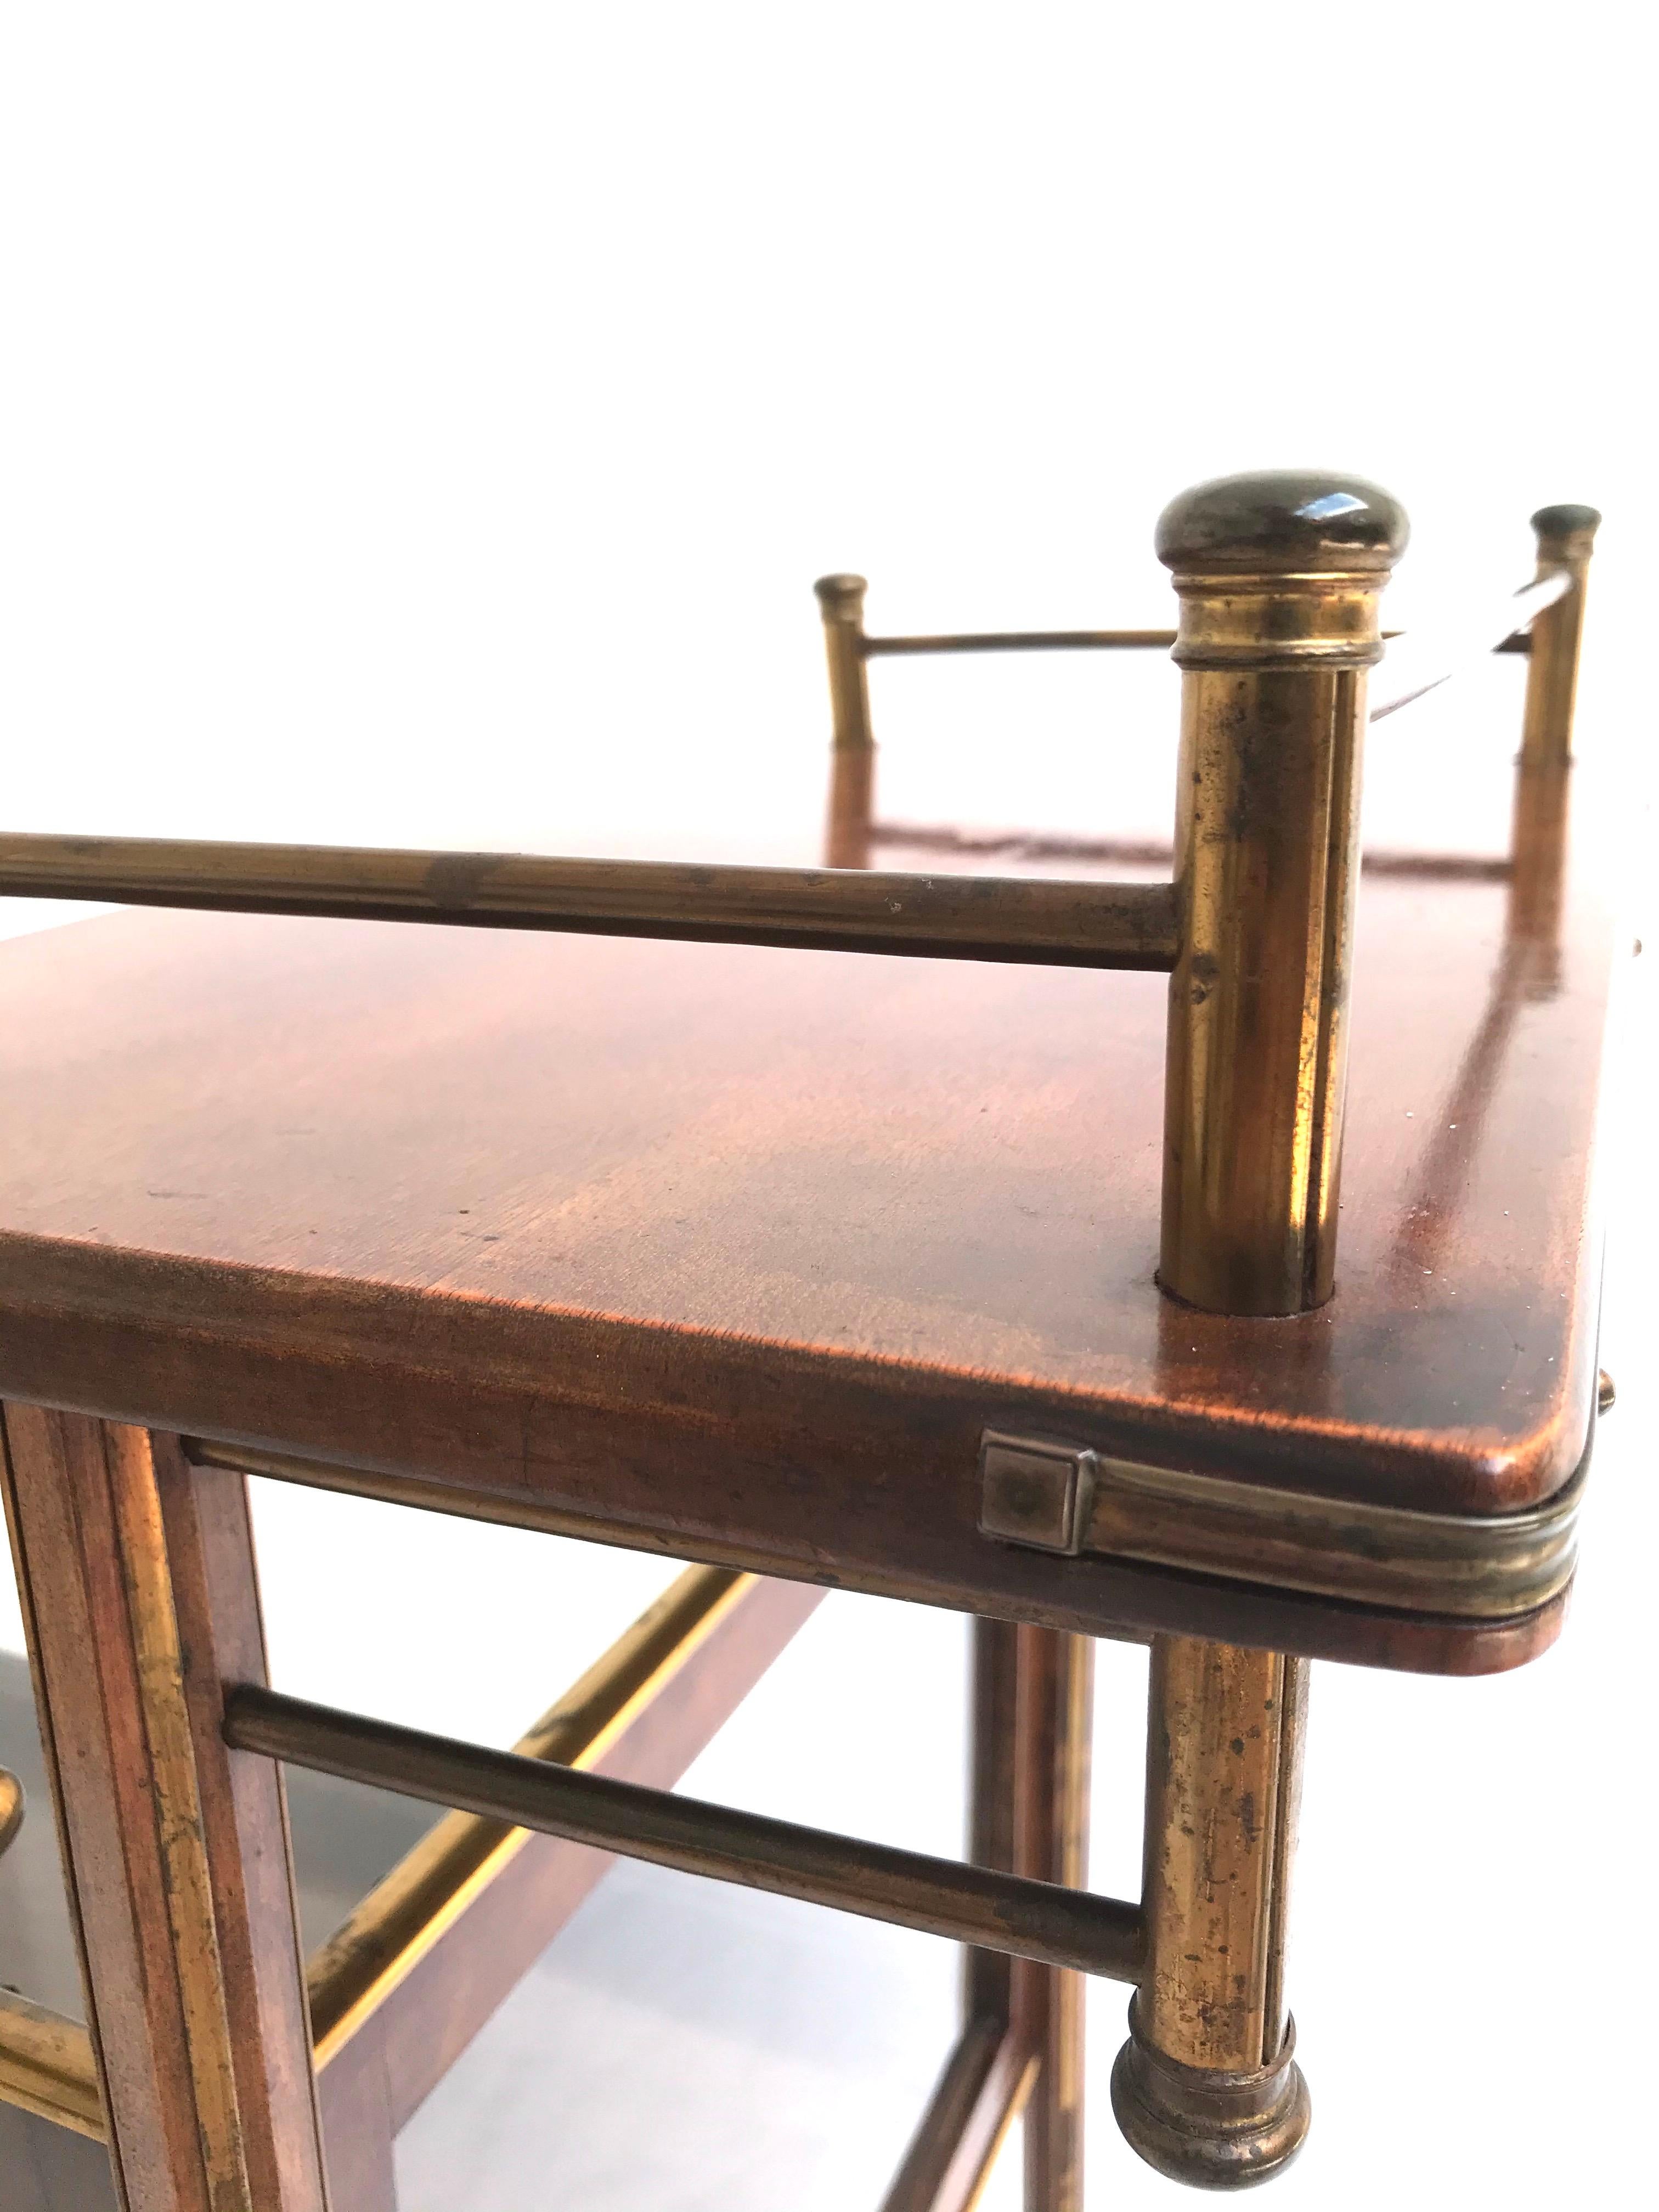 Stunning Asymmetrical Arts & Crafts Wood, Brass & Glass Drinks Trolley or Cart For Sale 6